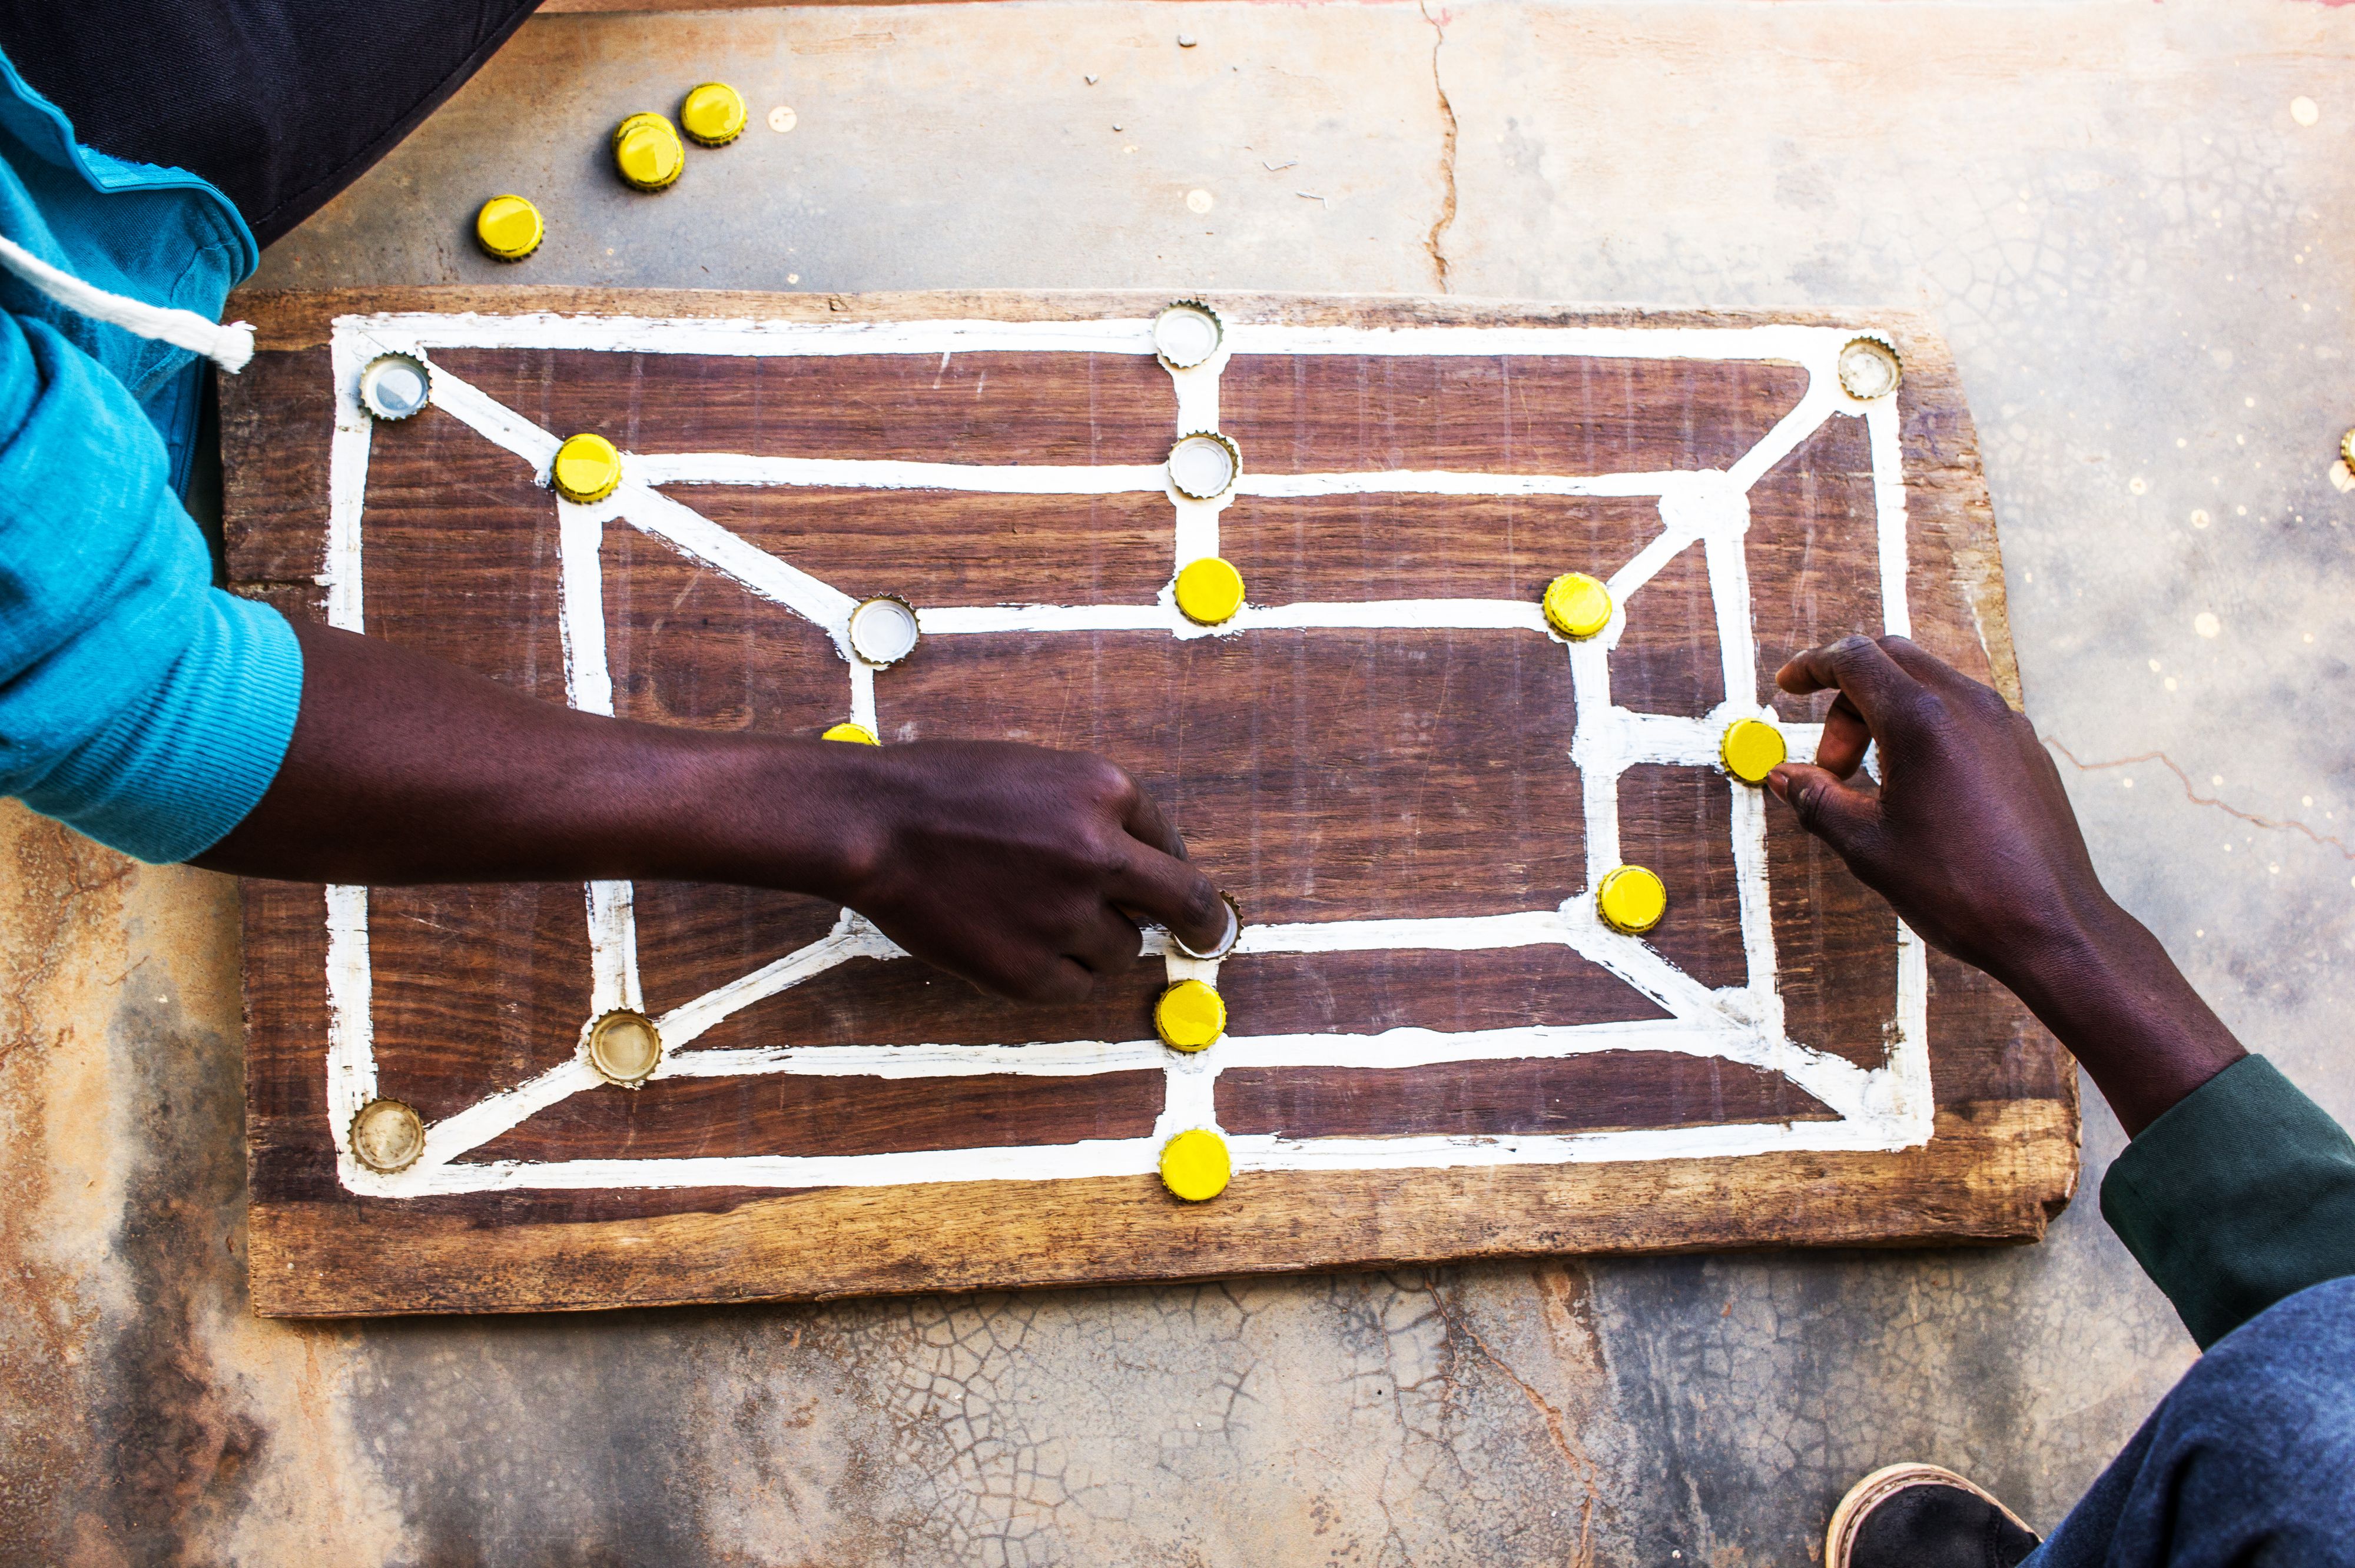 A morabaraba board with bottlecaps being used as pieces. One player is using them right-side-up and the other player is using them upside-down.